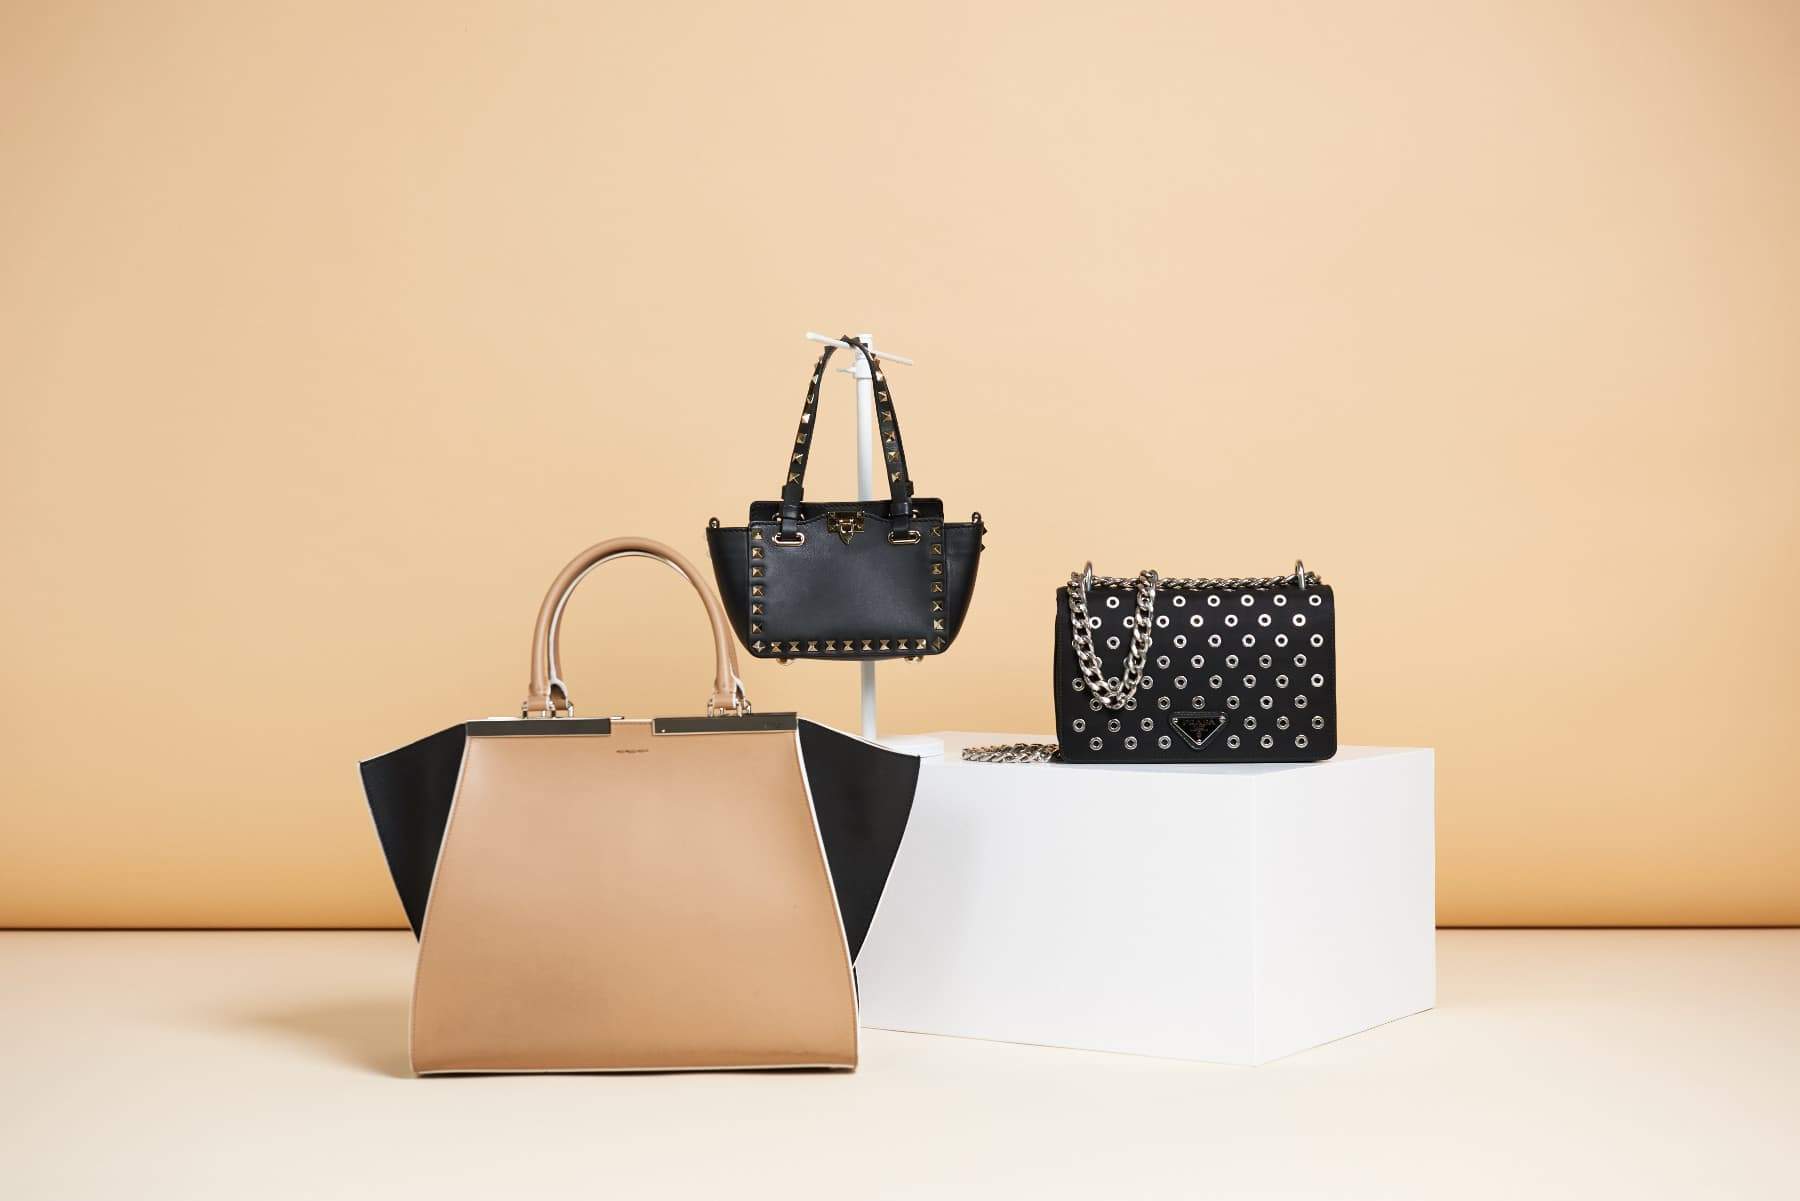 A variety of luxury handbags always cycle in and out of the Rebag store locations